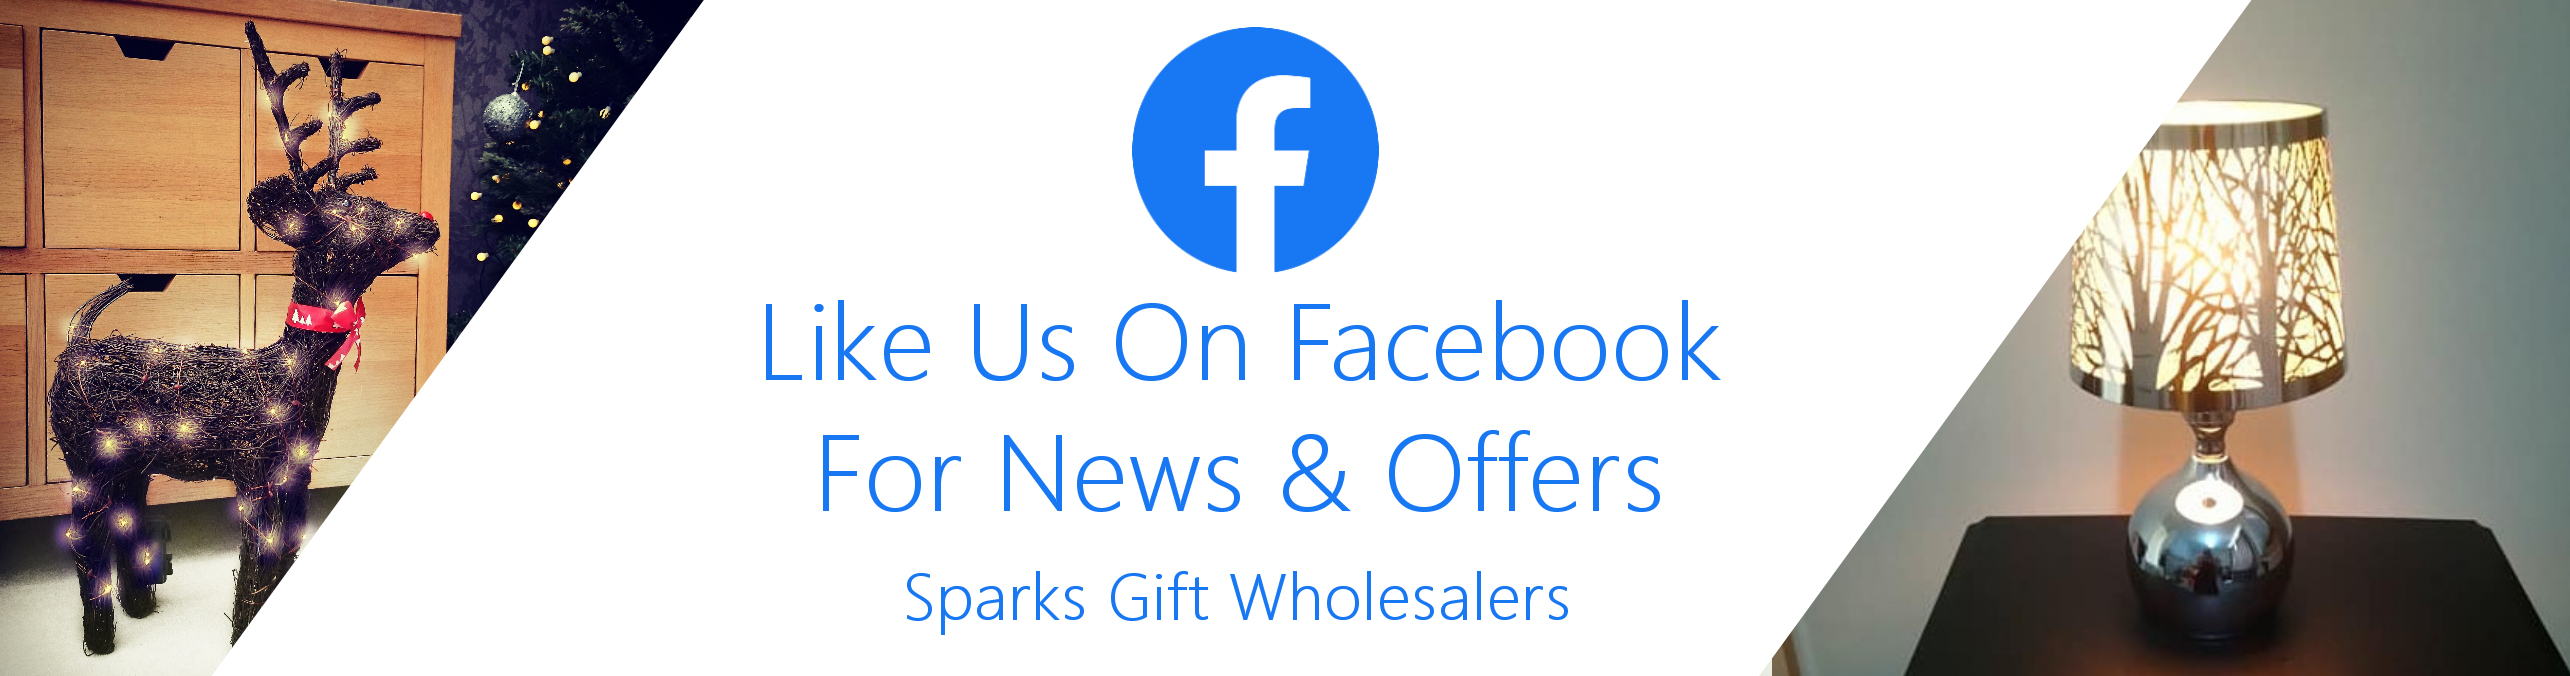 sparks gift wholesale facebook page